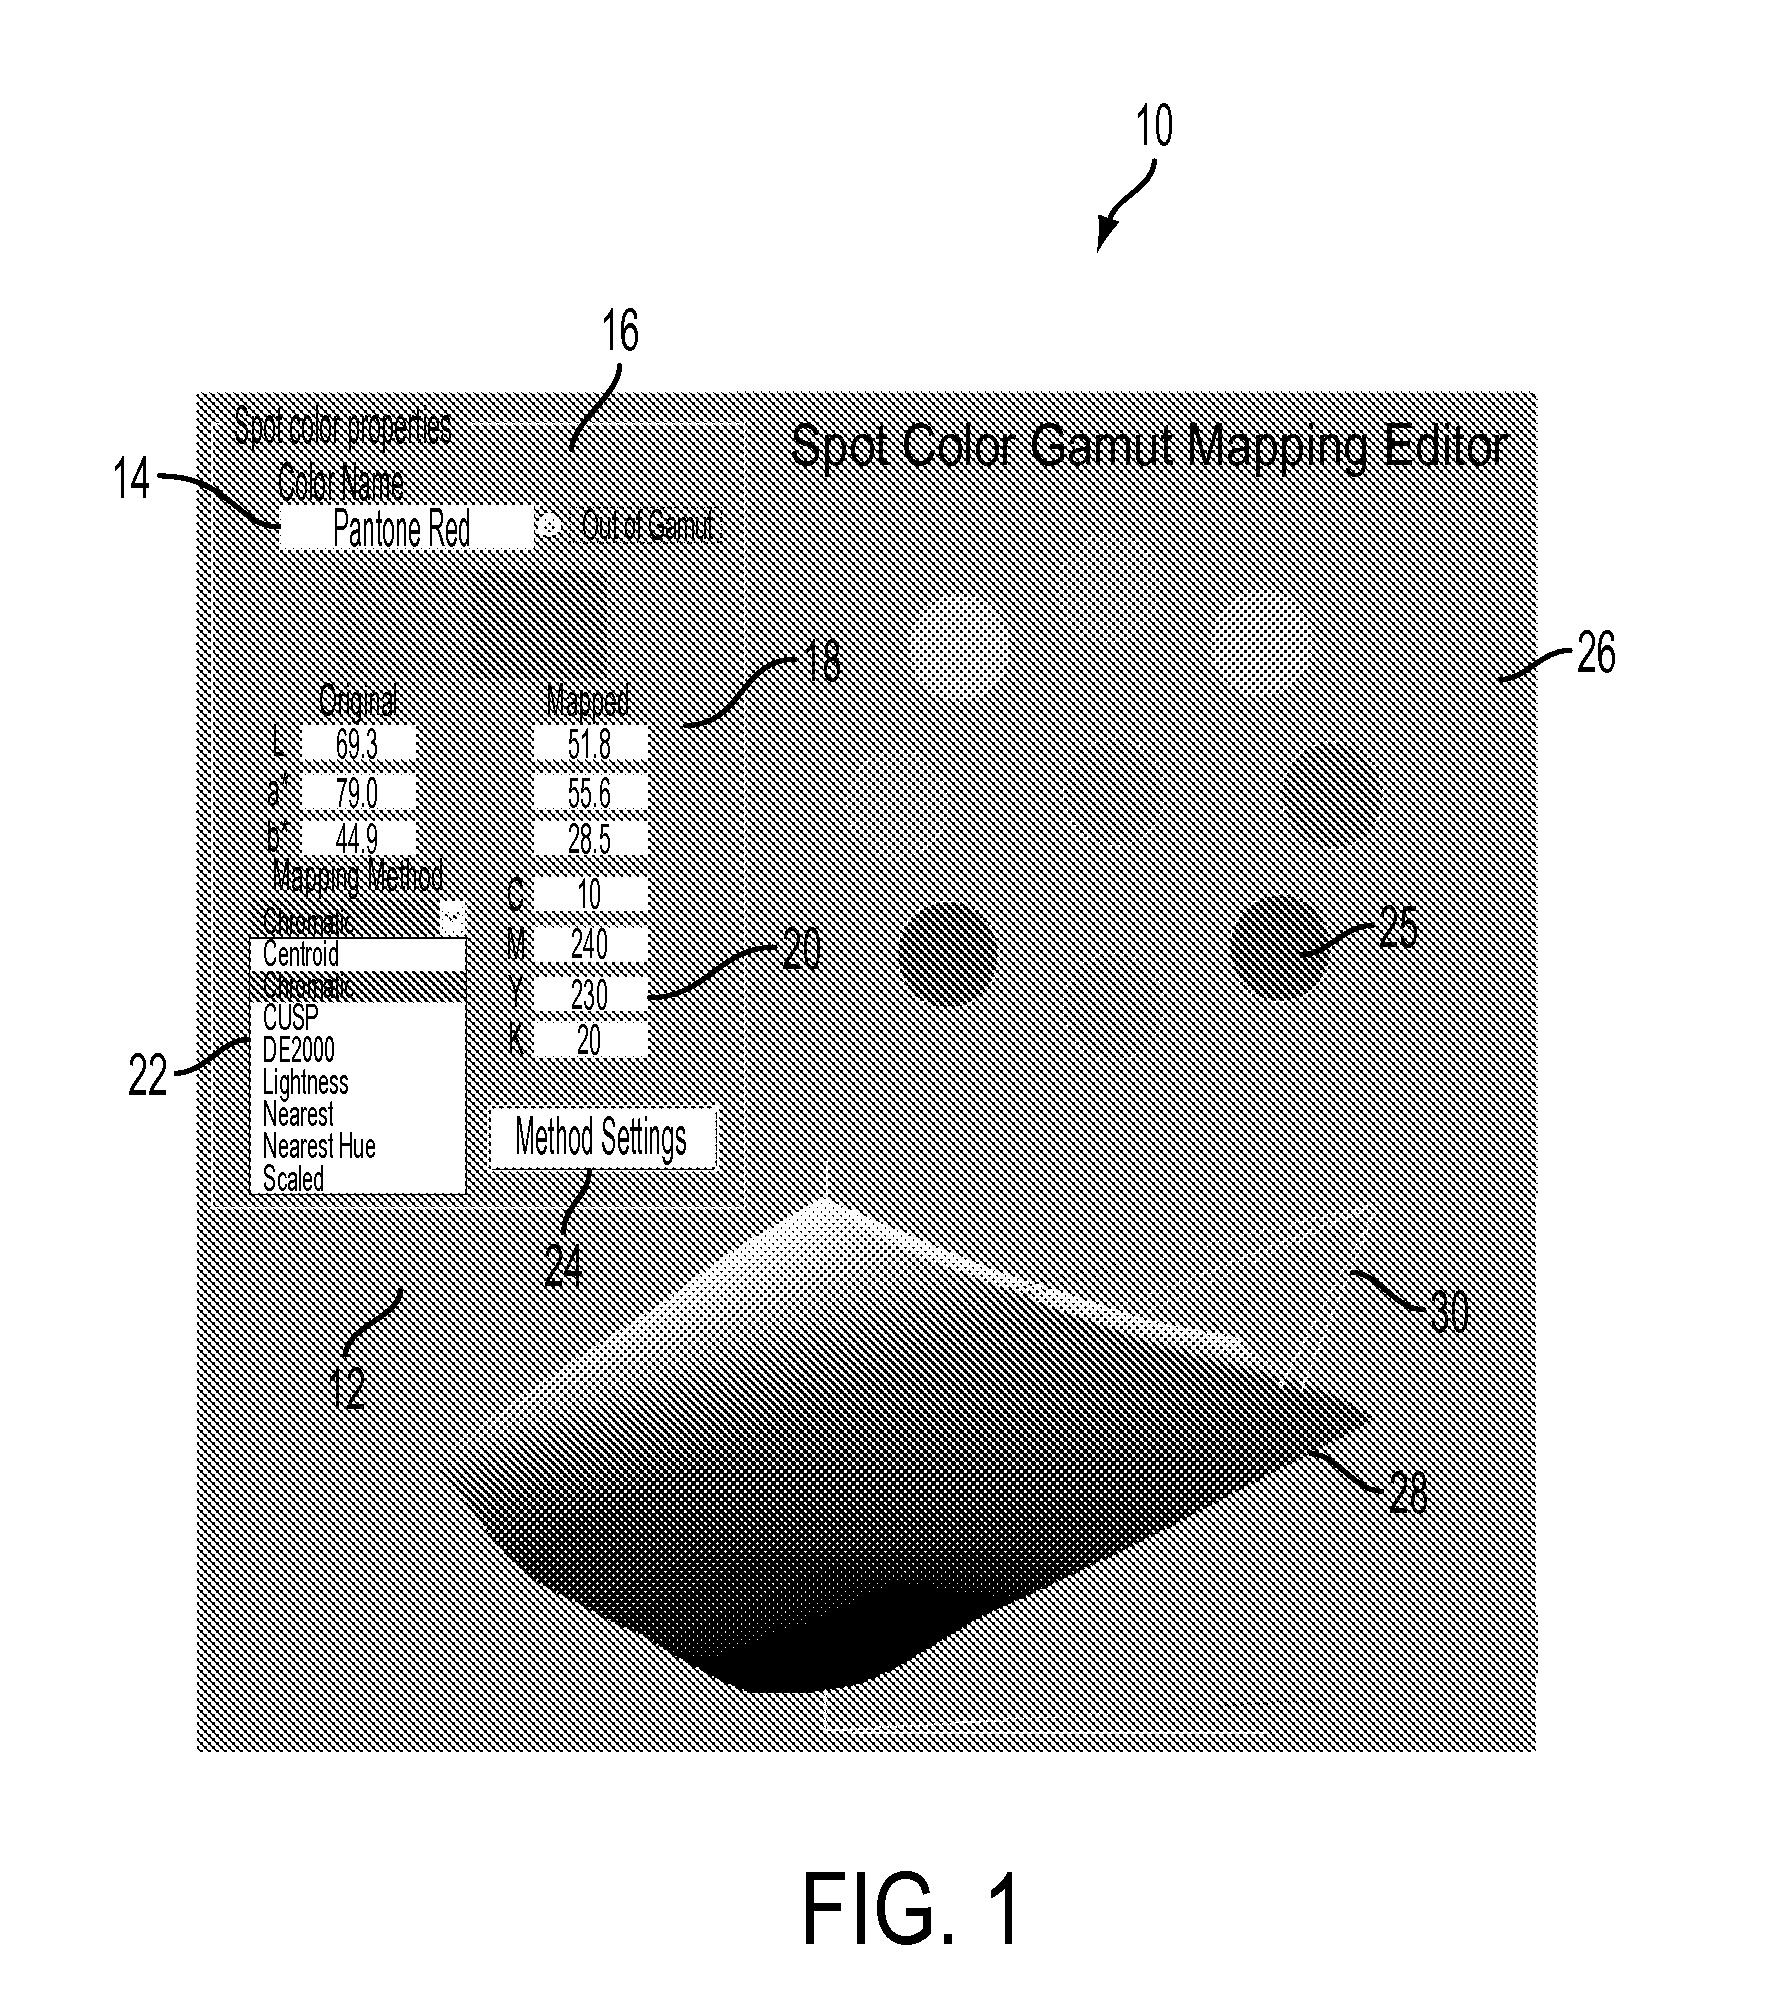 Method and system for out-of-gamut spot color reproduction